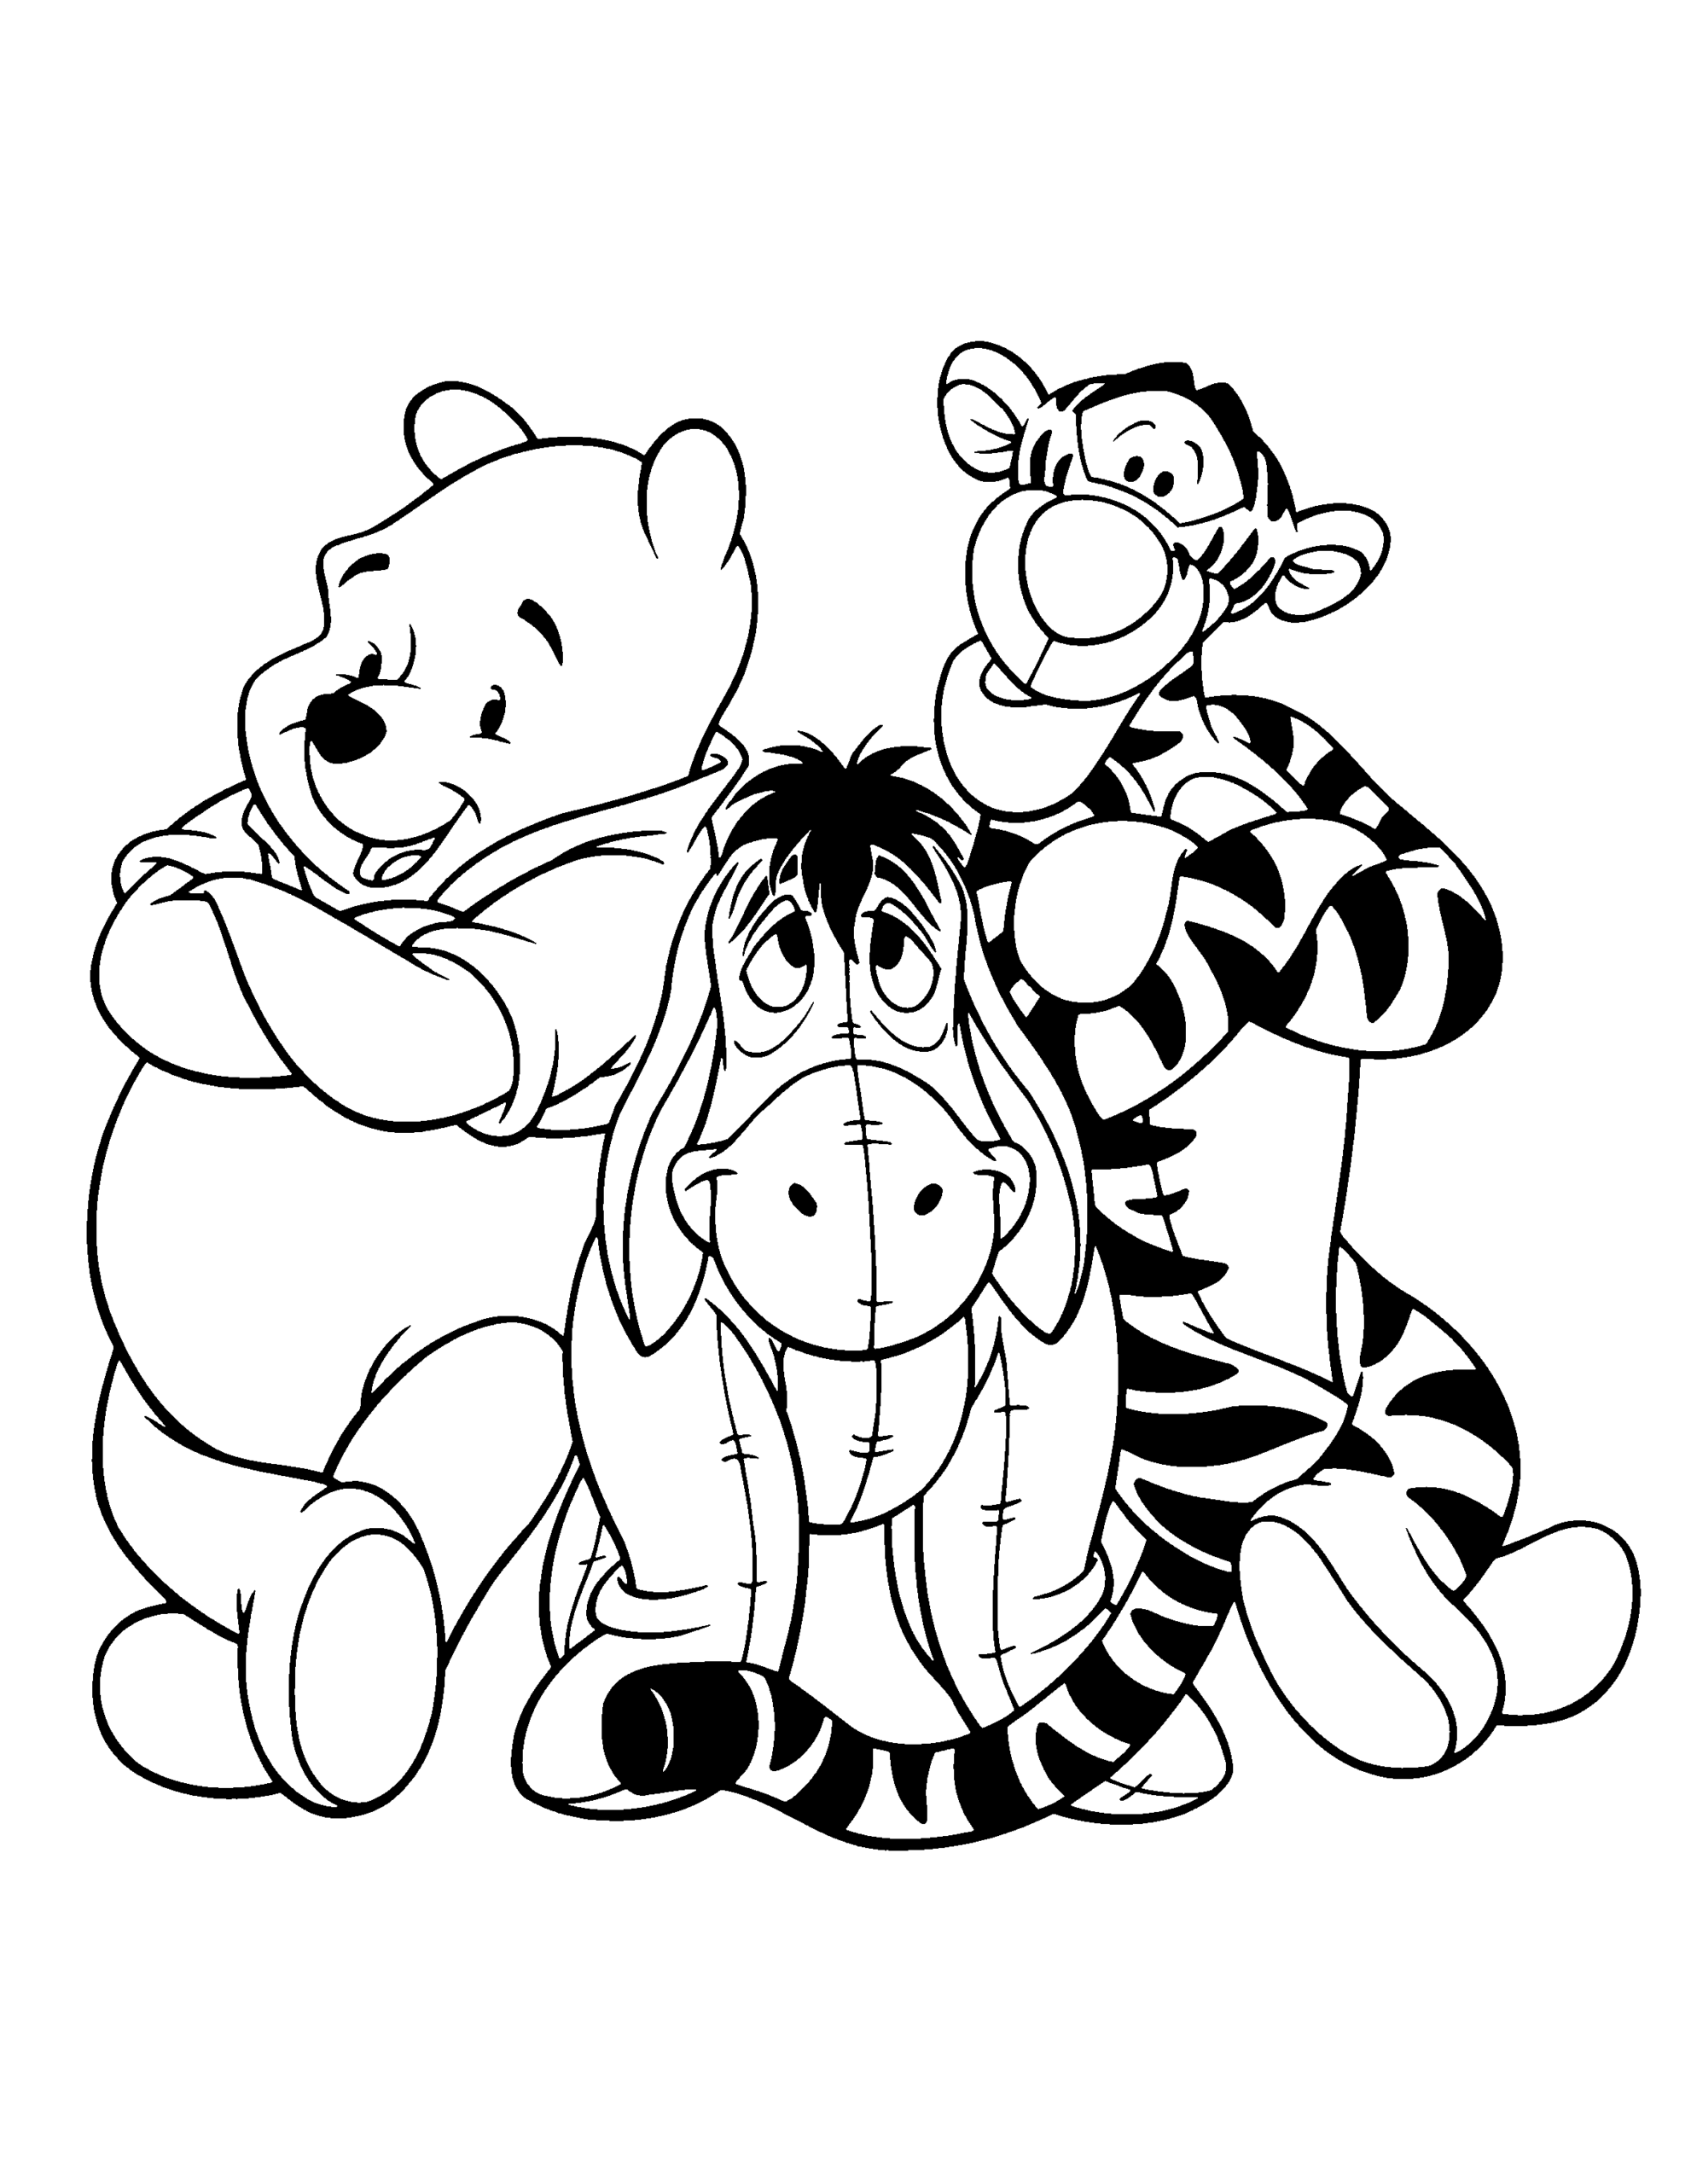 Winnie the Pooh Coloring Pages Cartoons winnie the pooh 60 Printable 2020 7177 Coloring4free